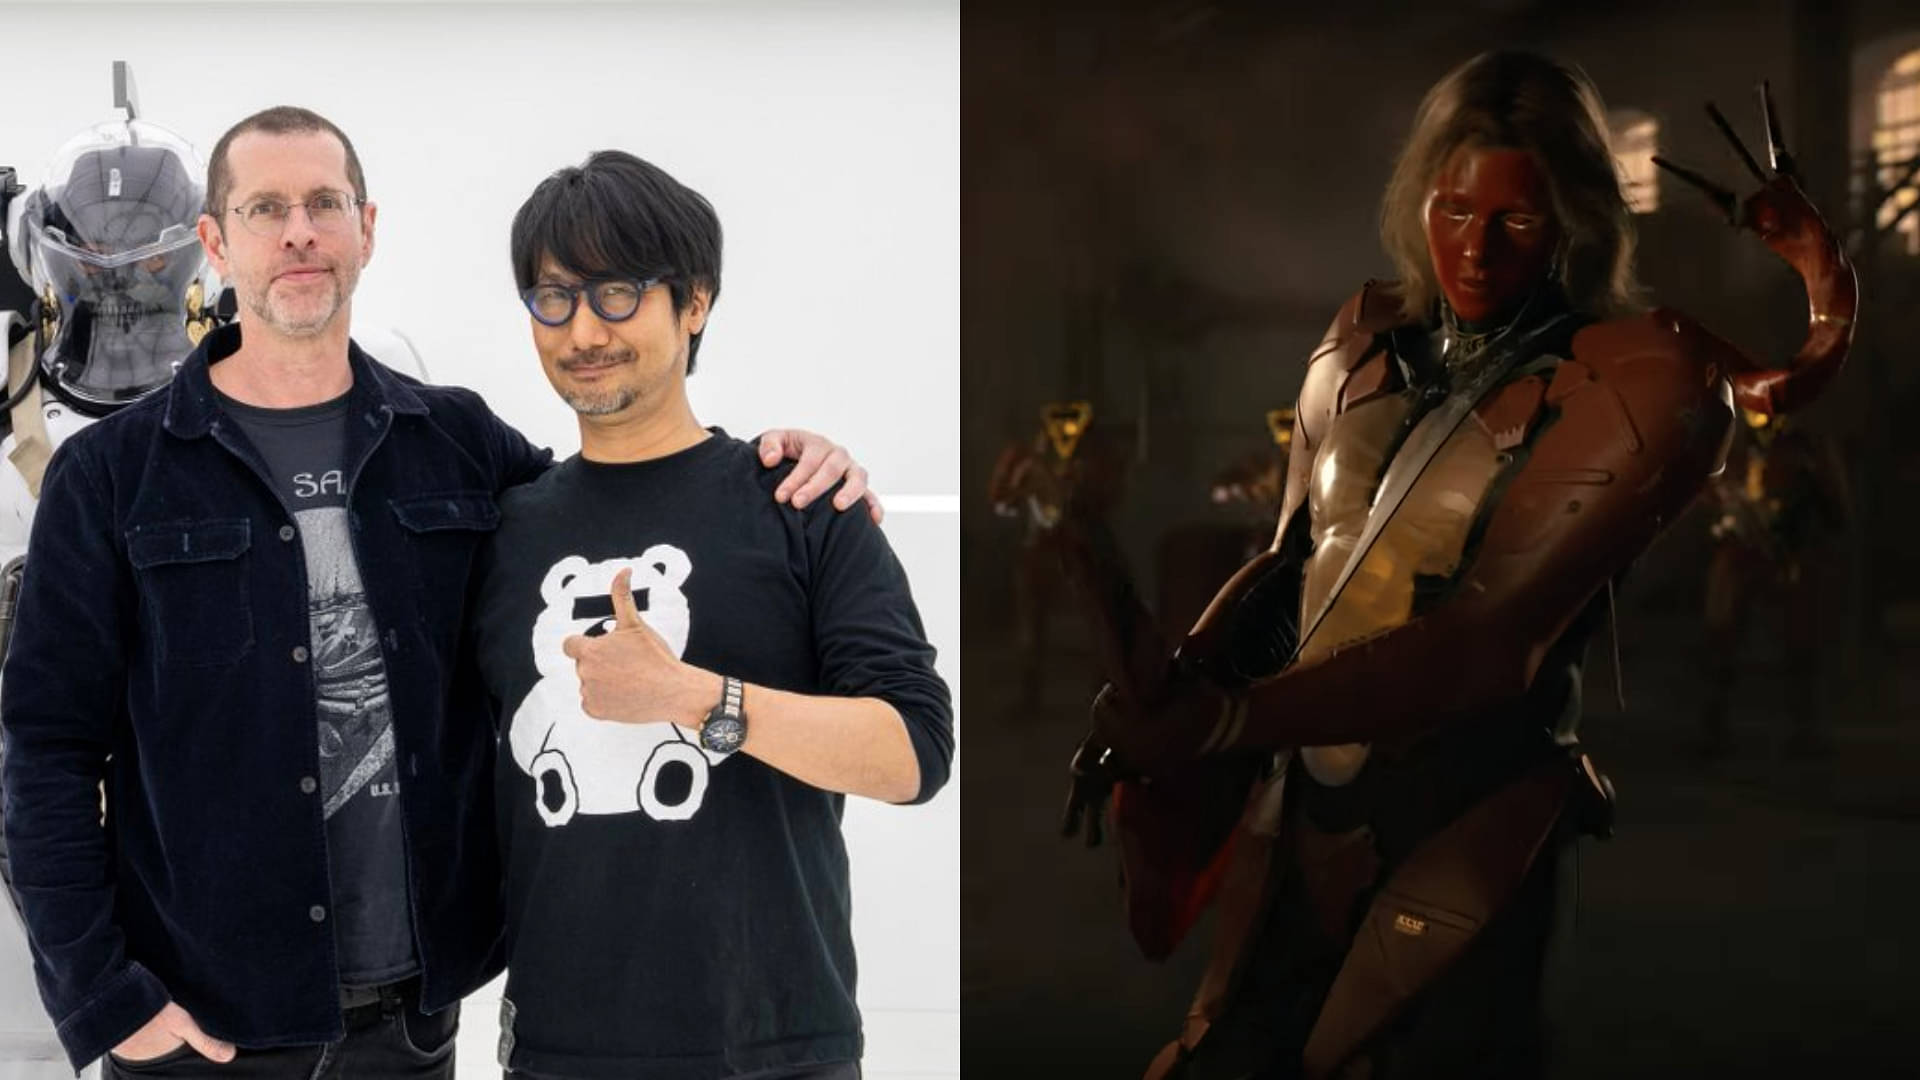 Latest Collaboration Rumors of Hideo Kojima and Game of Thrones Producer  D.B. Weiss Worries Death Stranding 2 Fans - The SportsRush